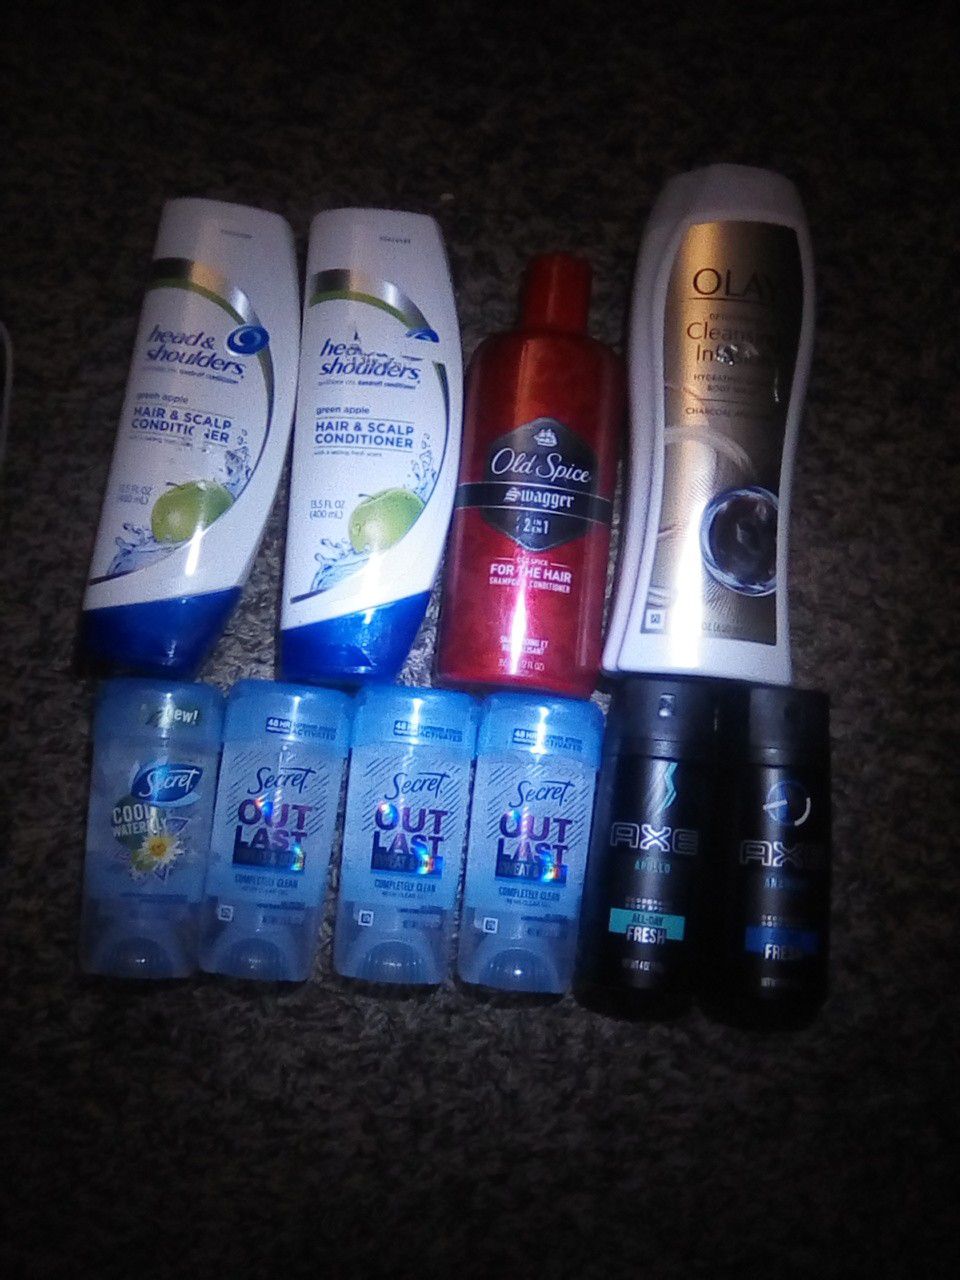 2 head & shoulders conditioner, old spice SWAGGER 2in1 wash, olay body wash, 2 axe body sprays & 4 secret deoderants